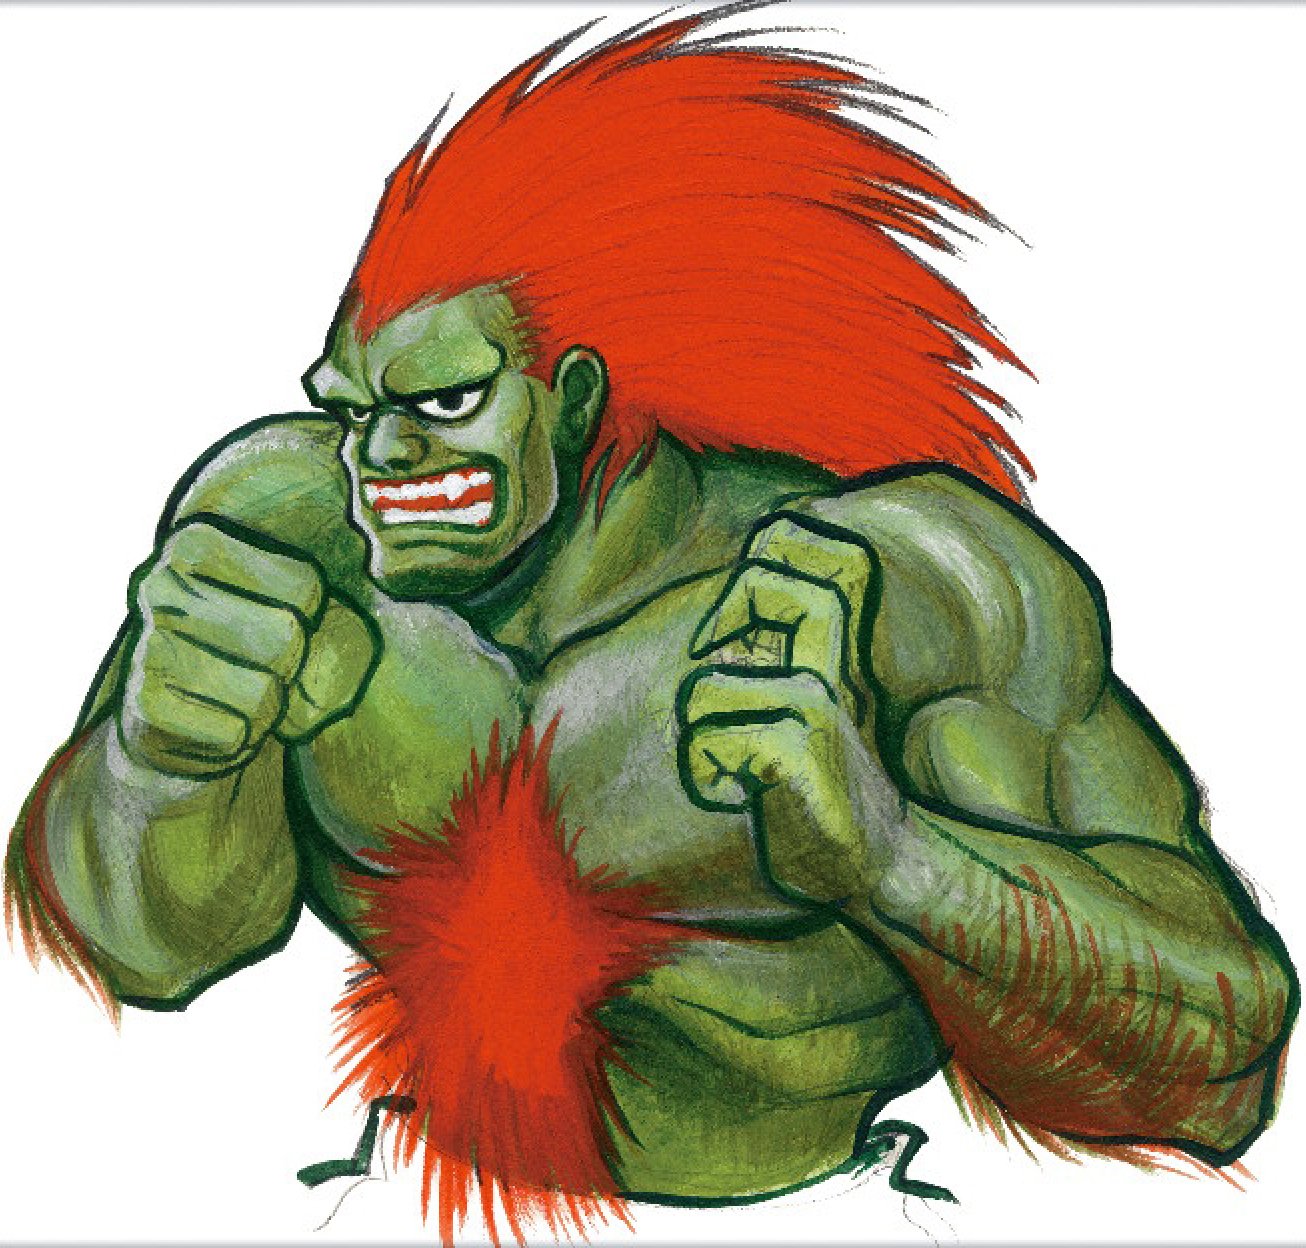 If His Name Is Blanka, Why Is He Green? — Thrilling Tales of Old Video Games